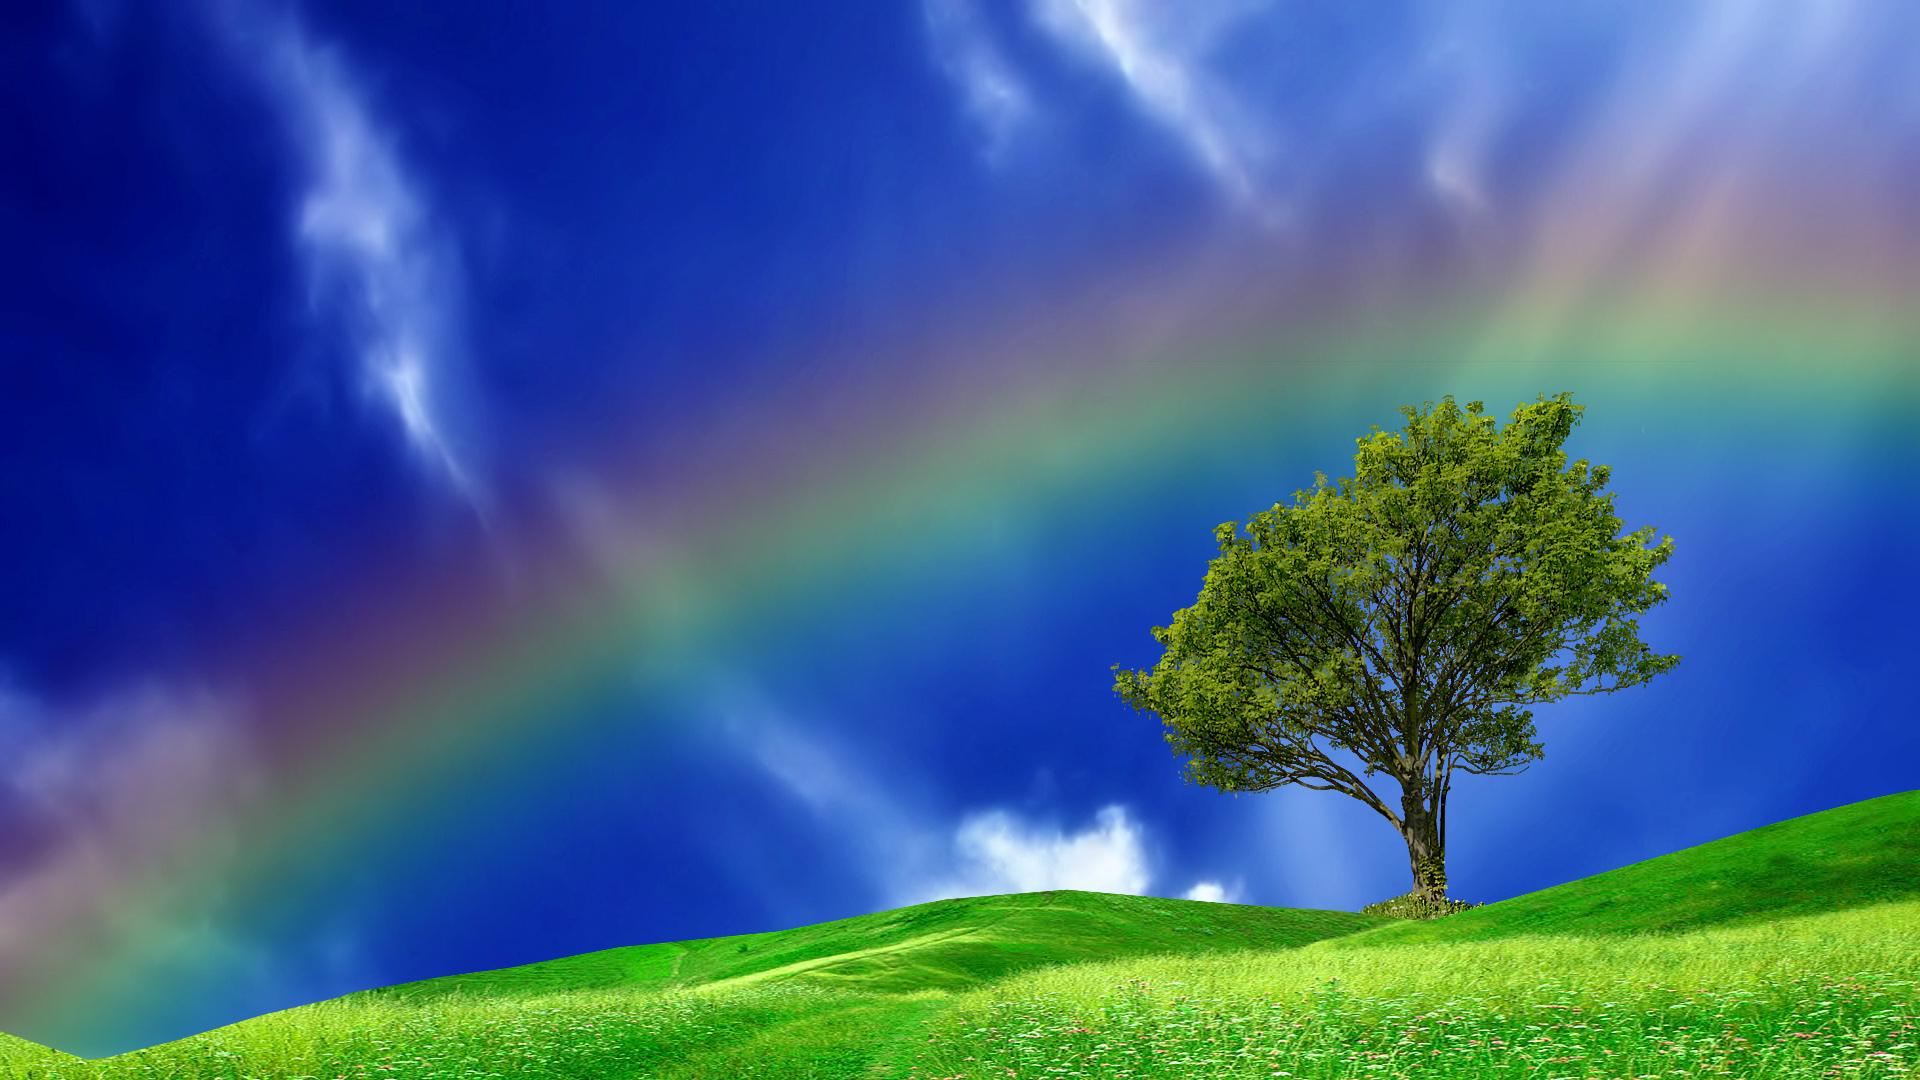 Free download Rainbow In A Blue Sky 23859 Wallpaper HD [1920x1080] for your Desktop, Mobile & Tablet. Explore Blue Sky Desktop Wallpaper. Beautiful Sky Wallpaper, Blue Skies Wallpaper, Blue Clouds Wallpaper